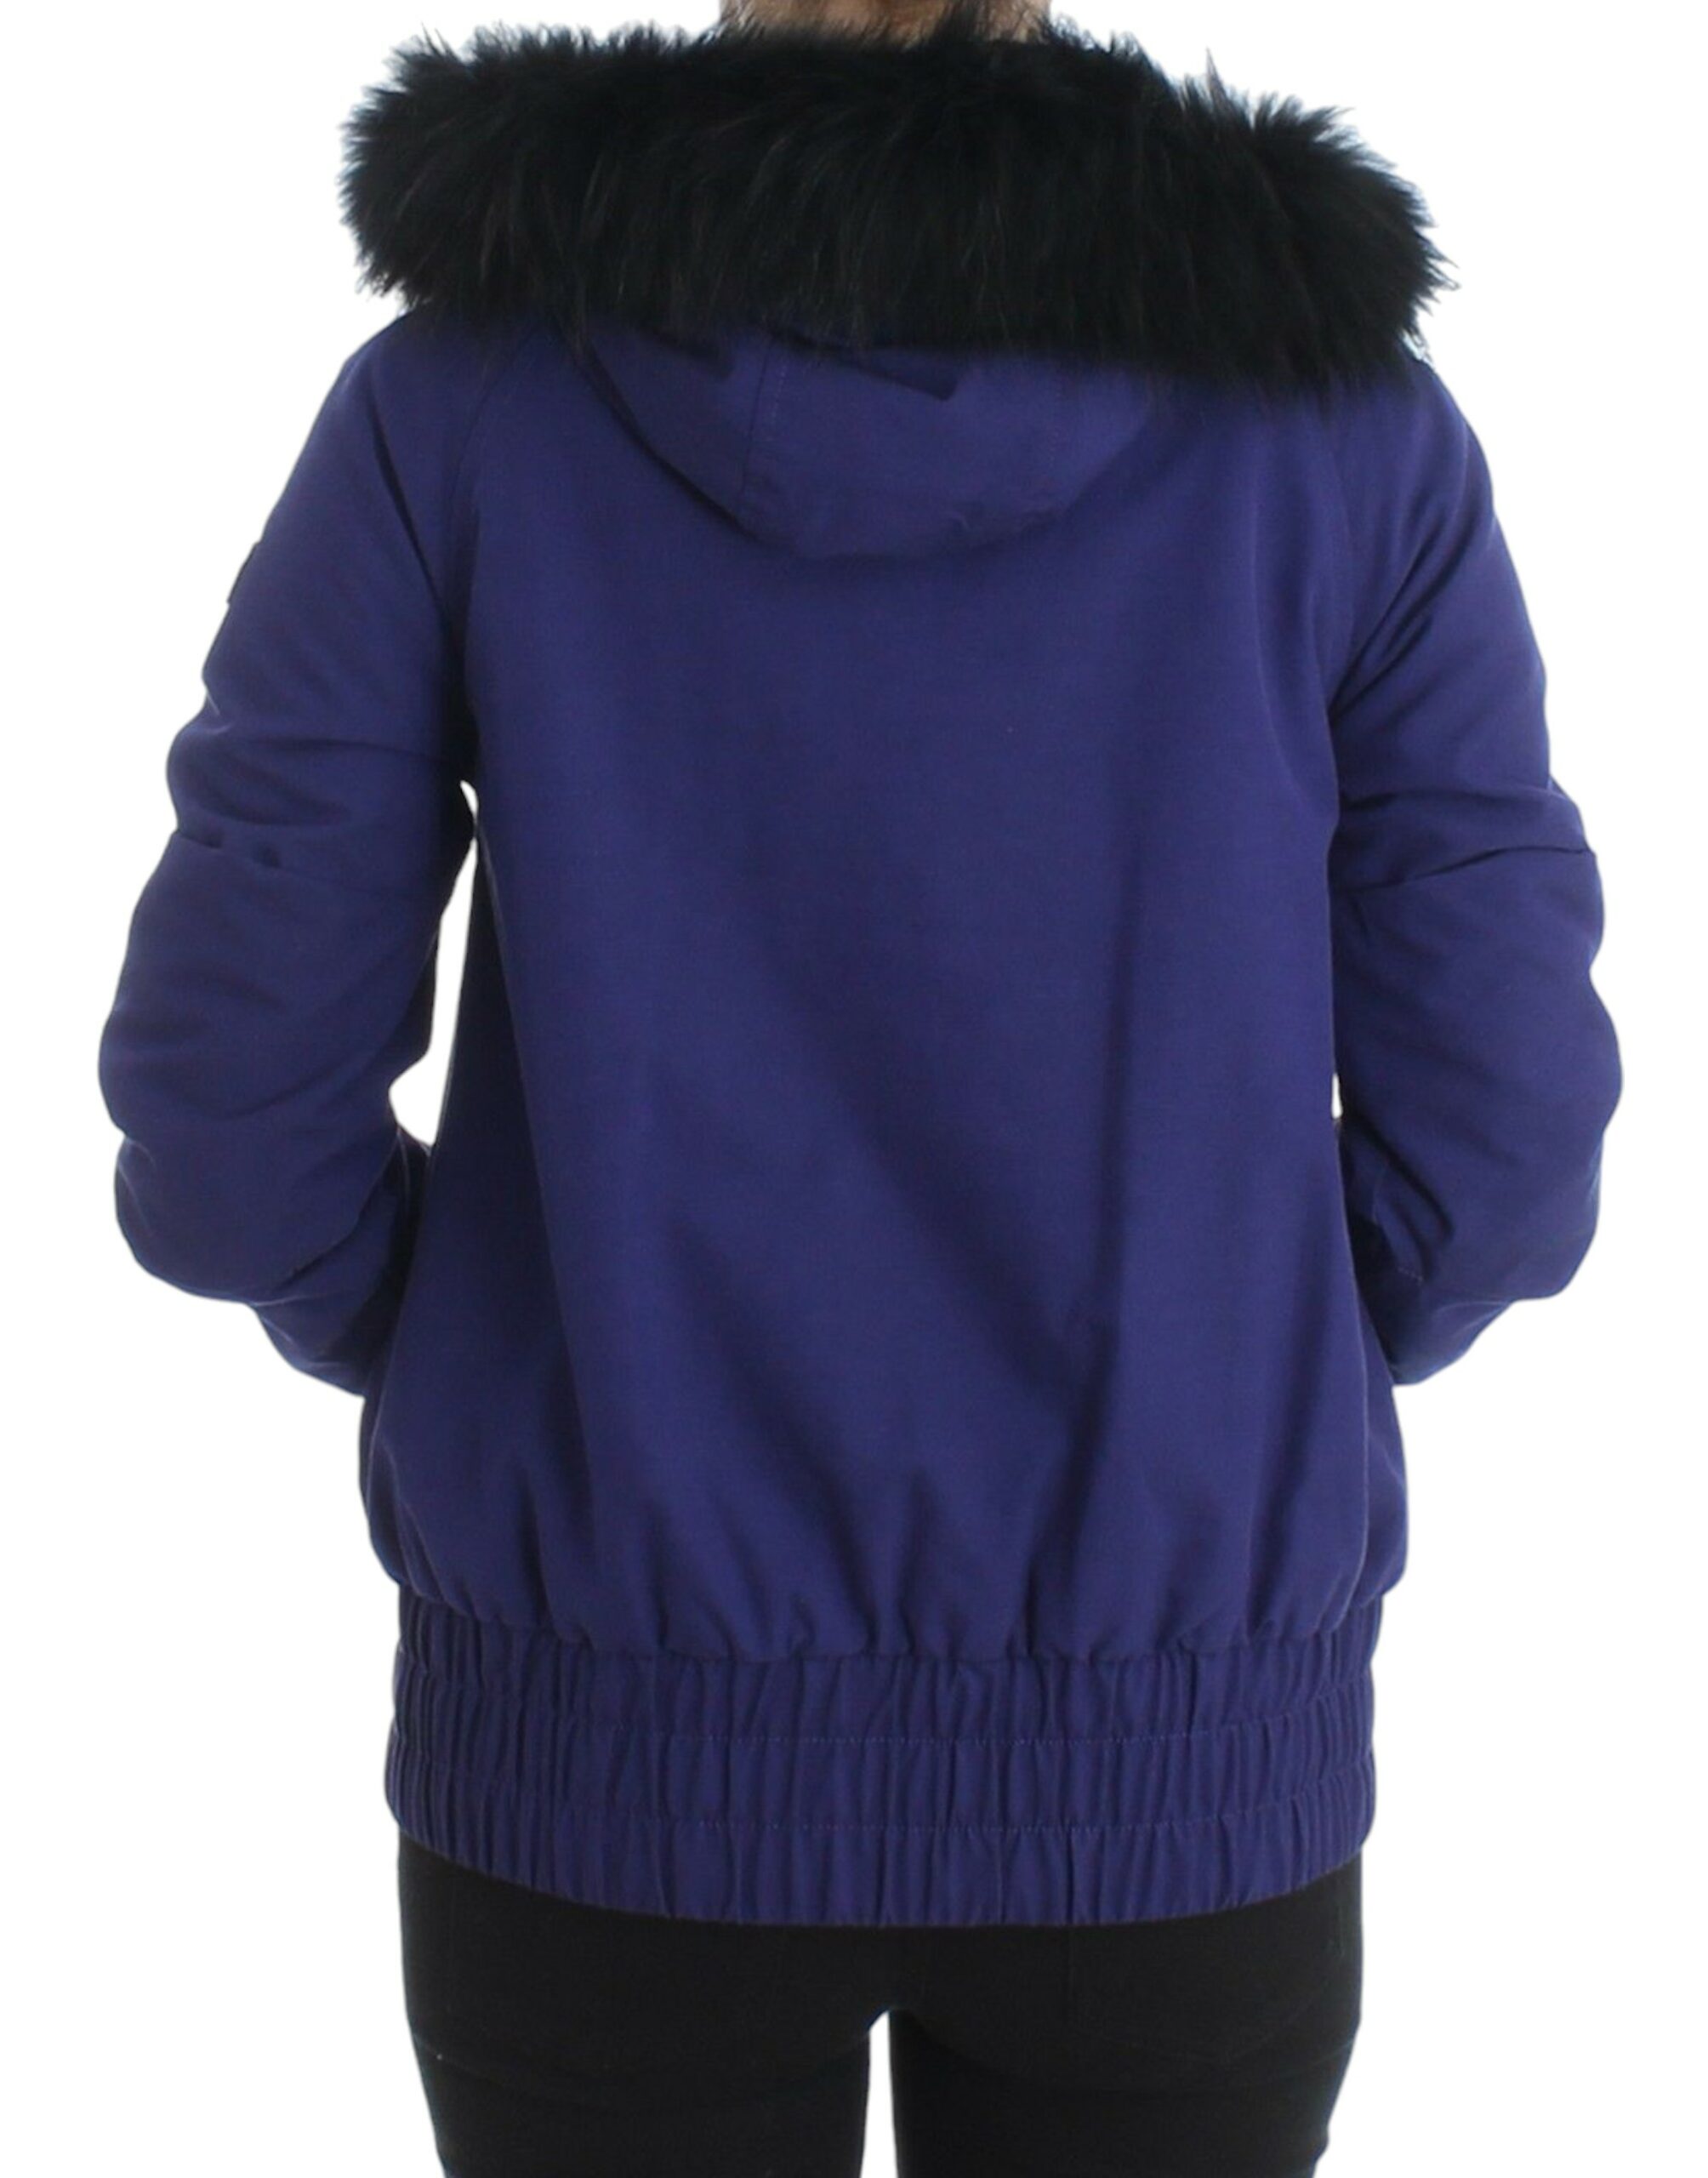 Chic Blue K-Way Jacket with Faux Fur Accent SIG11604-2